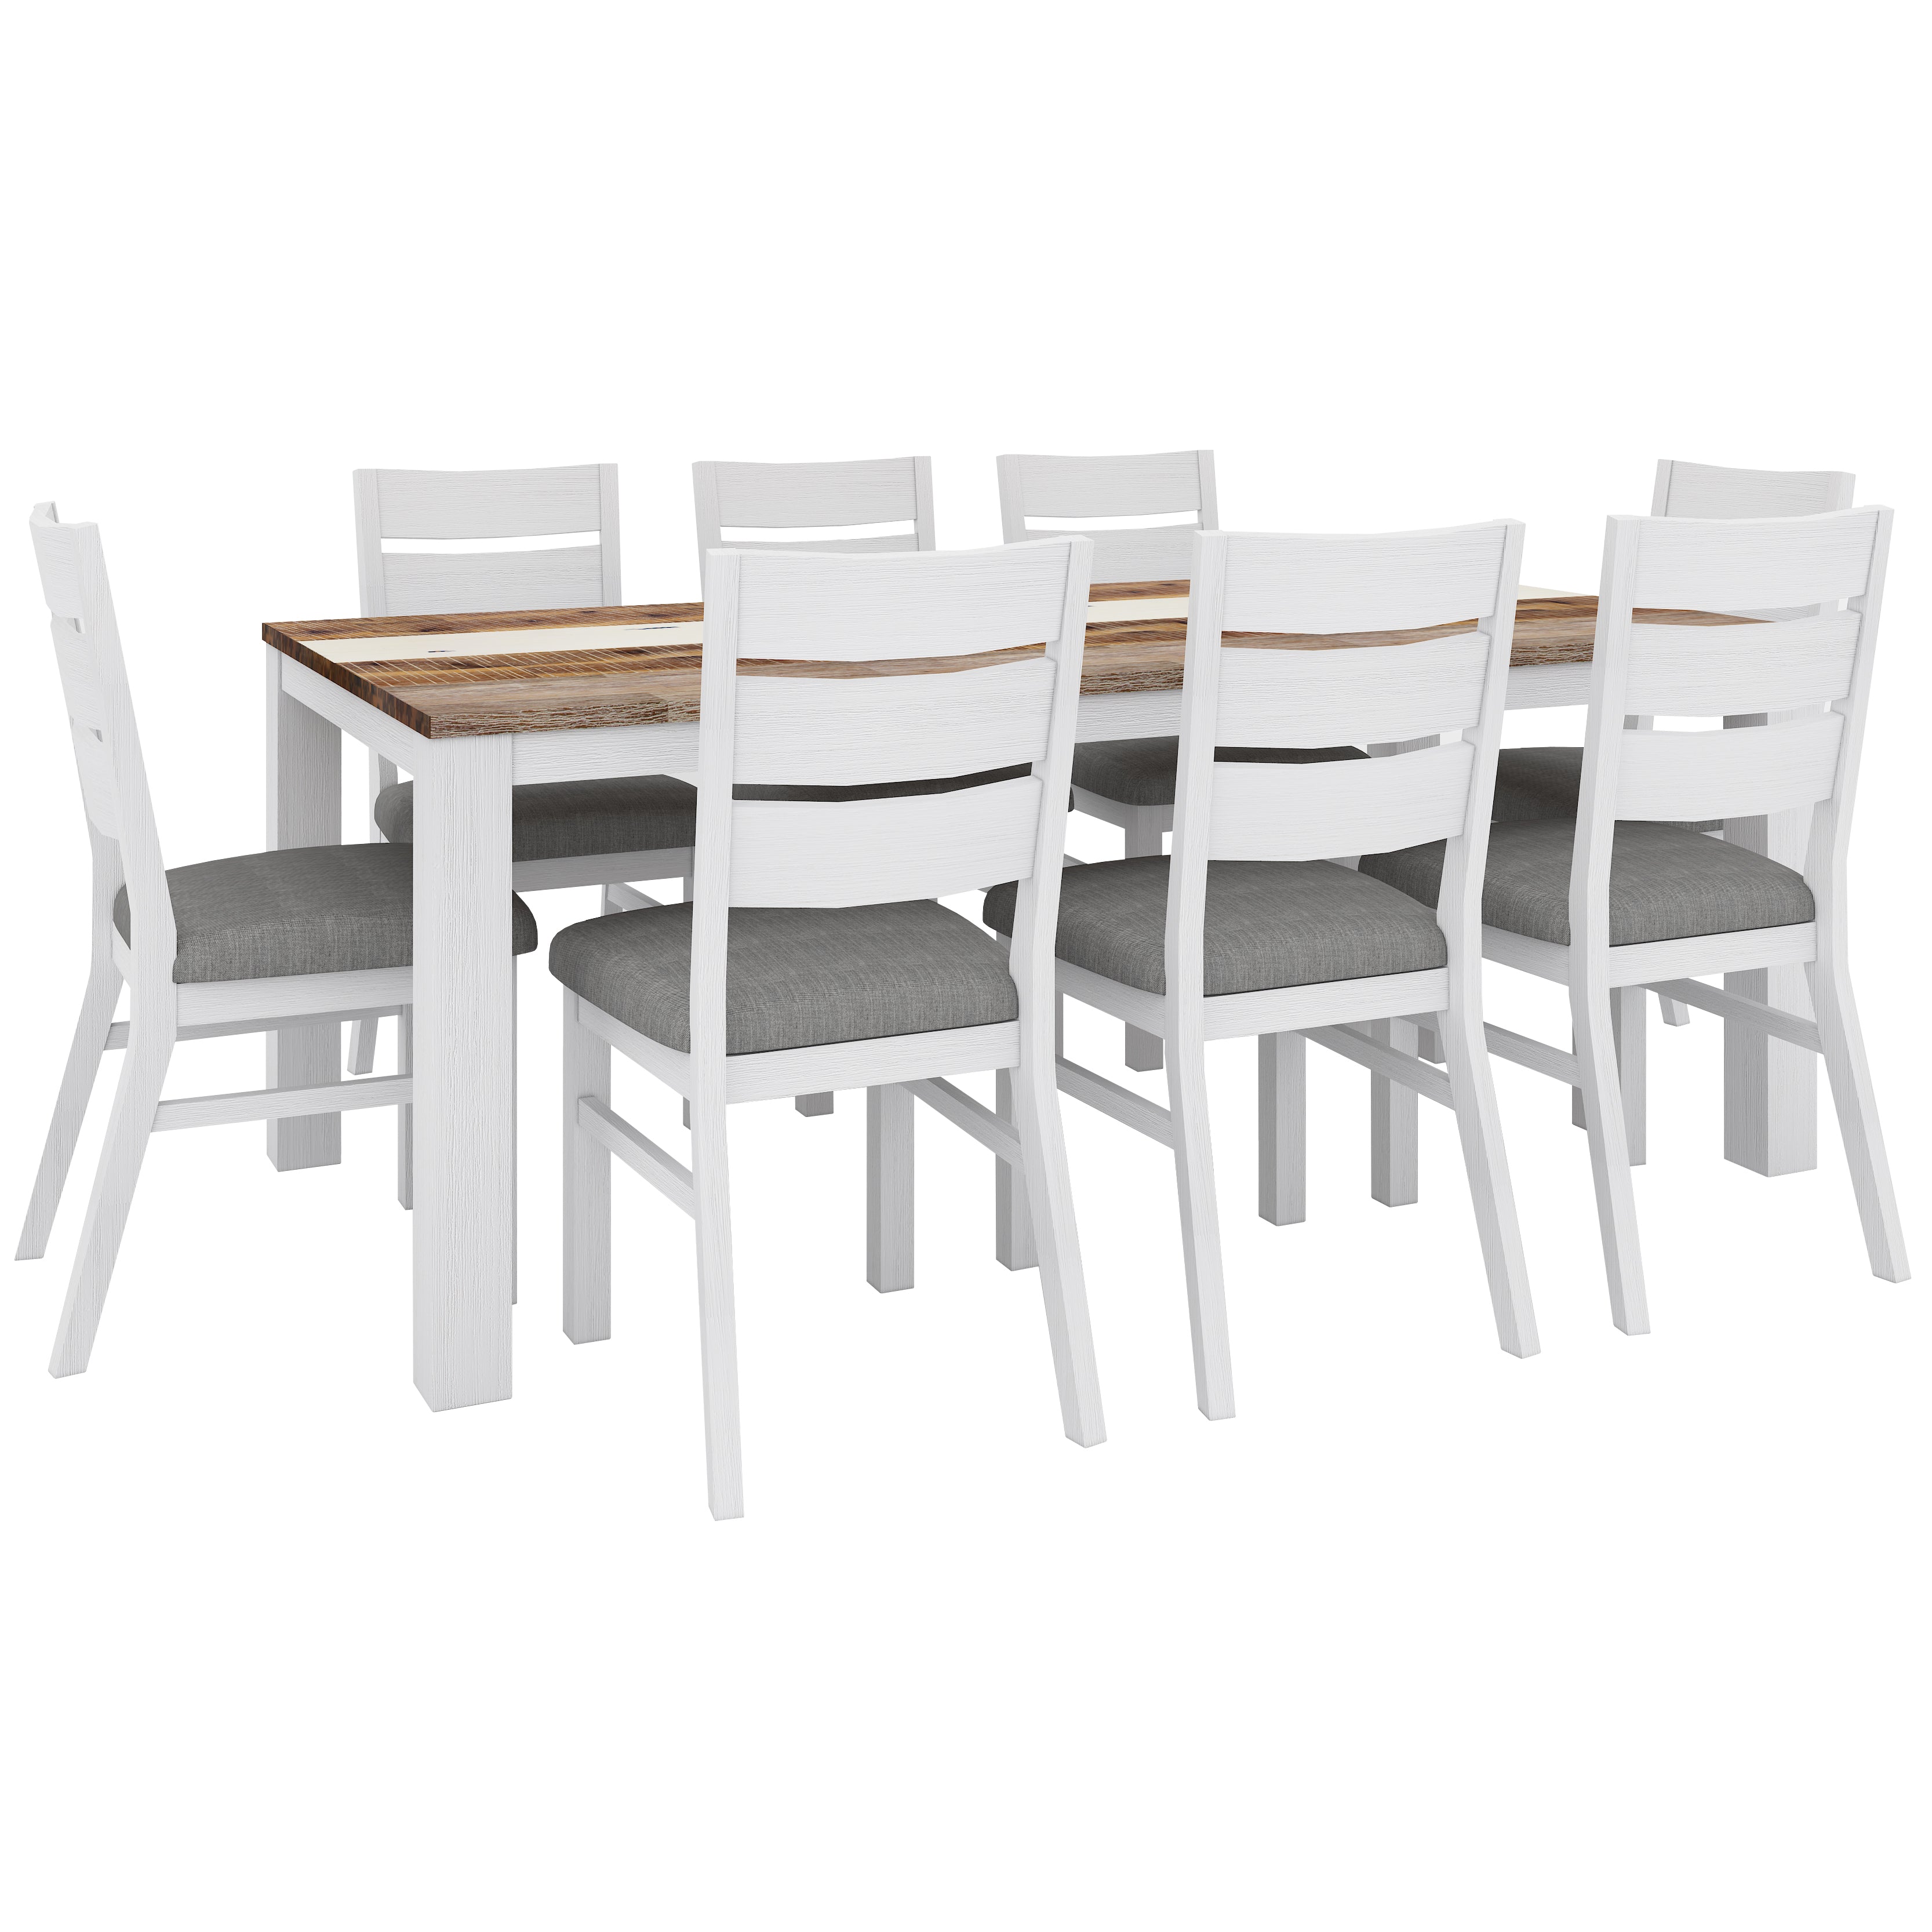 Orville 9pc Dining Set 200cm Table 8 Chair Solid Acacia Wood Timber -Multi Color - SILBERSHELL